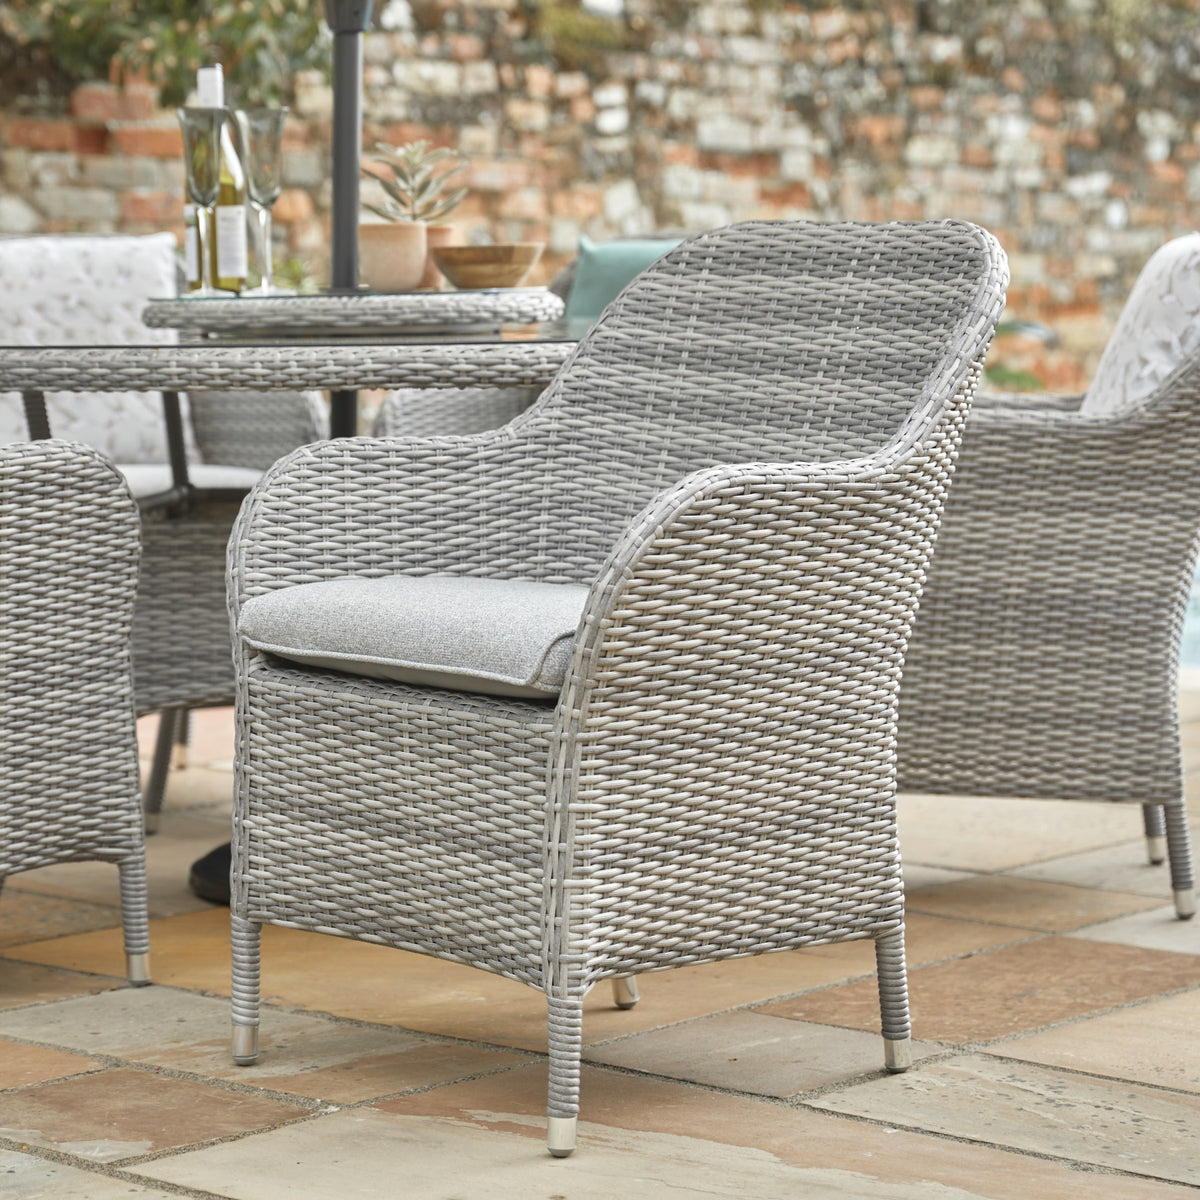 LG Outdoor Monte Carlo Stone Rattan Weave 6 Seat Garden Furniture Dining Set with Lazy Susan